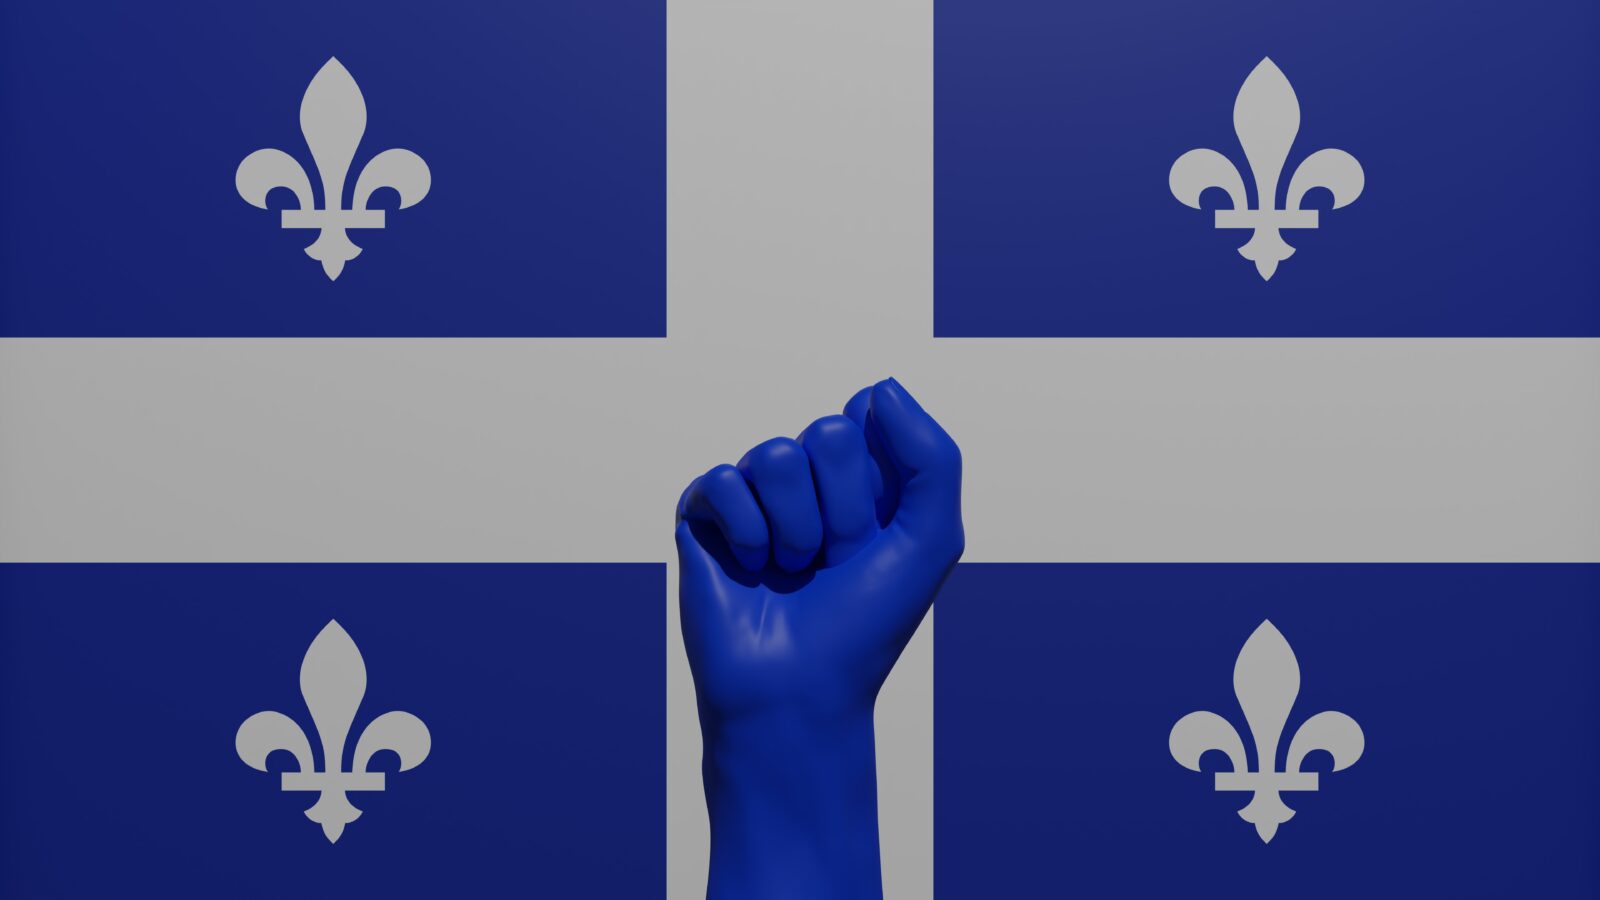 A single raised blue fist in the center in front of the flag of Quebec